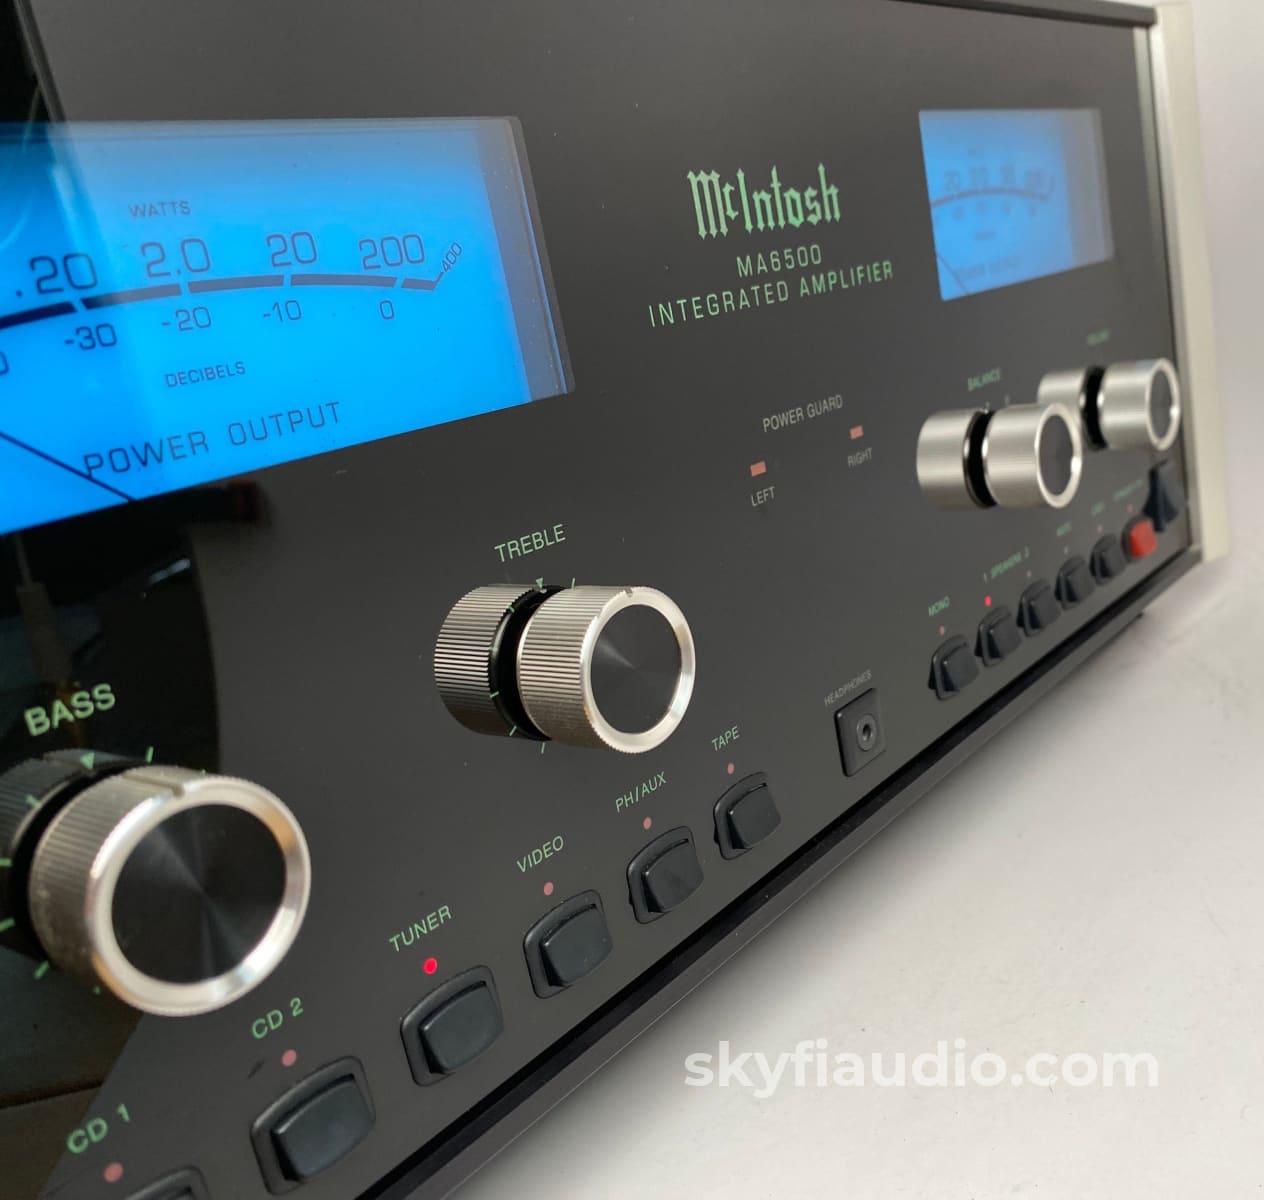 Mcintosh Ma6500 Integrated Amplifier - All Analog!